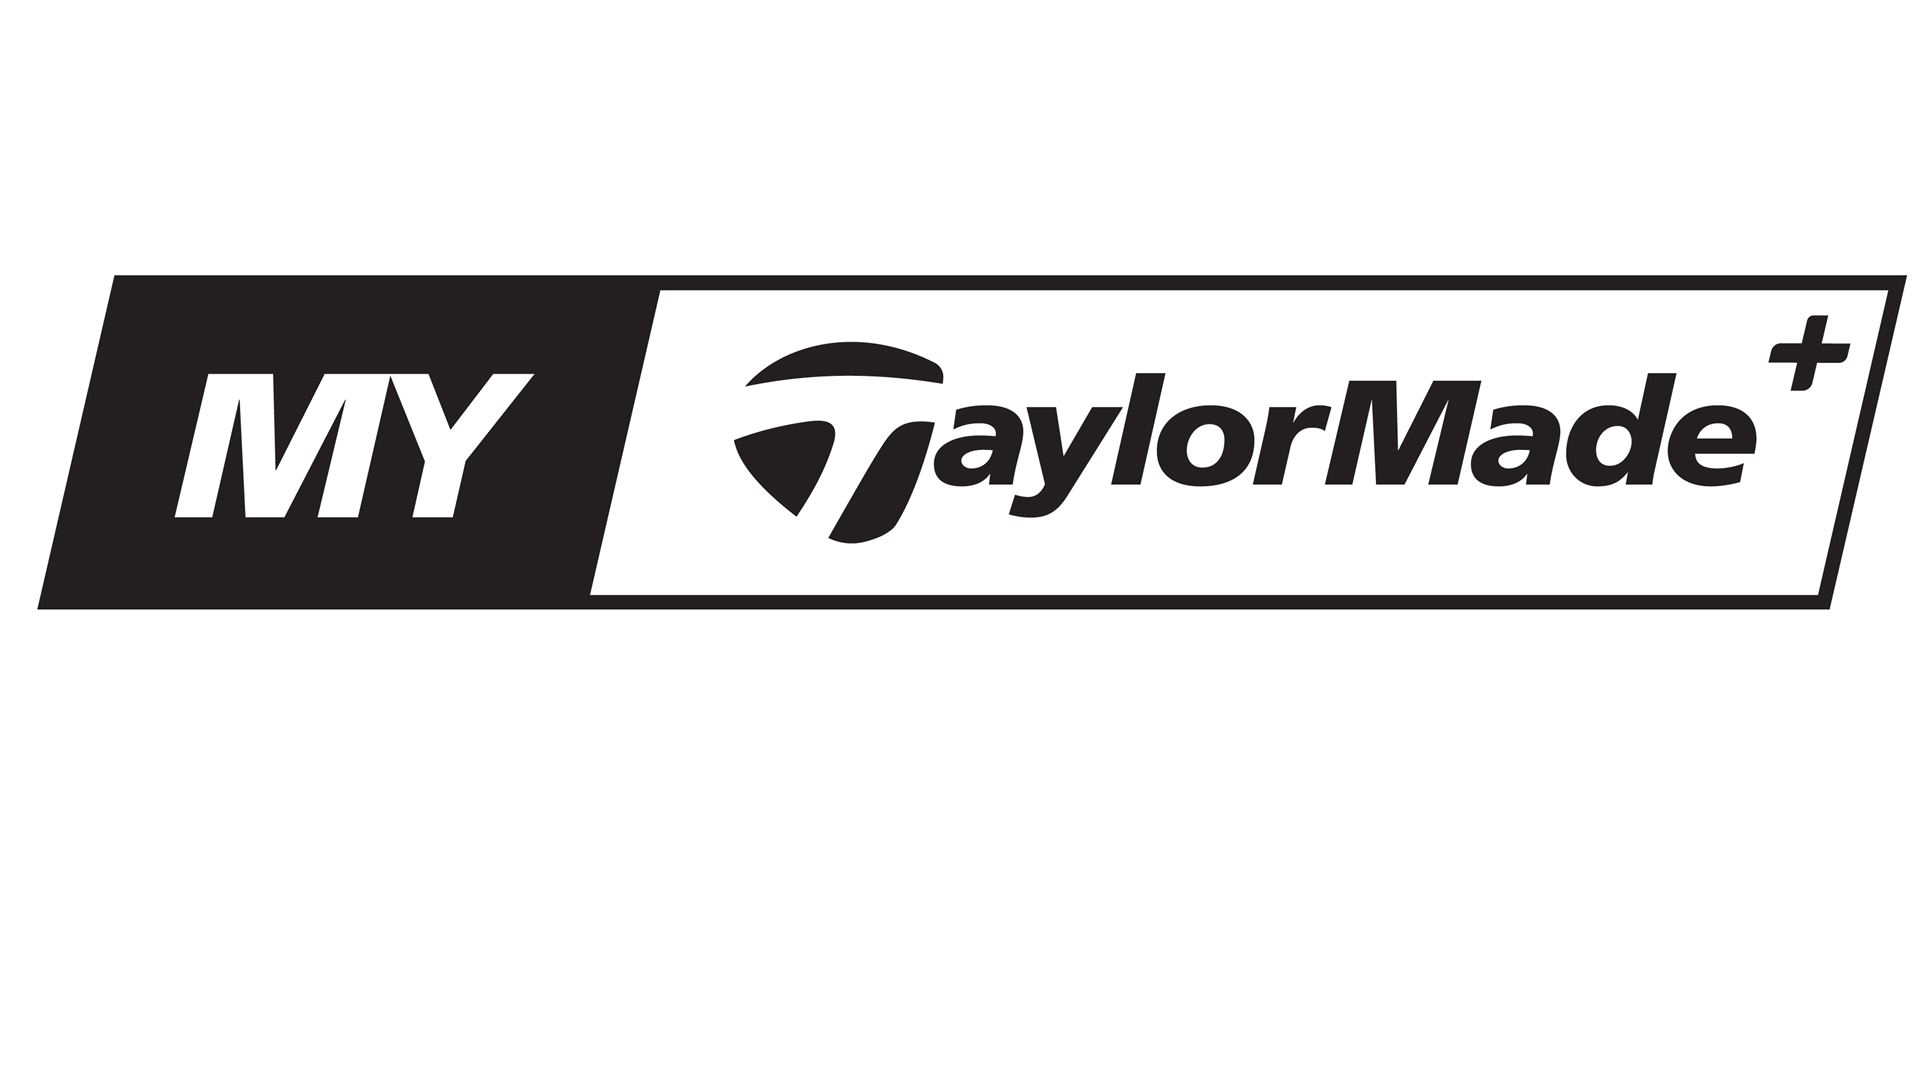 TaylorMade Golf Company Announces MyTaylorMade+, An Advanced Digital Service Providing Exclusive Products, Instruction, Content & More